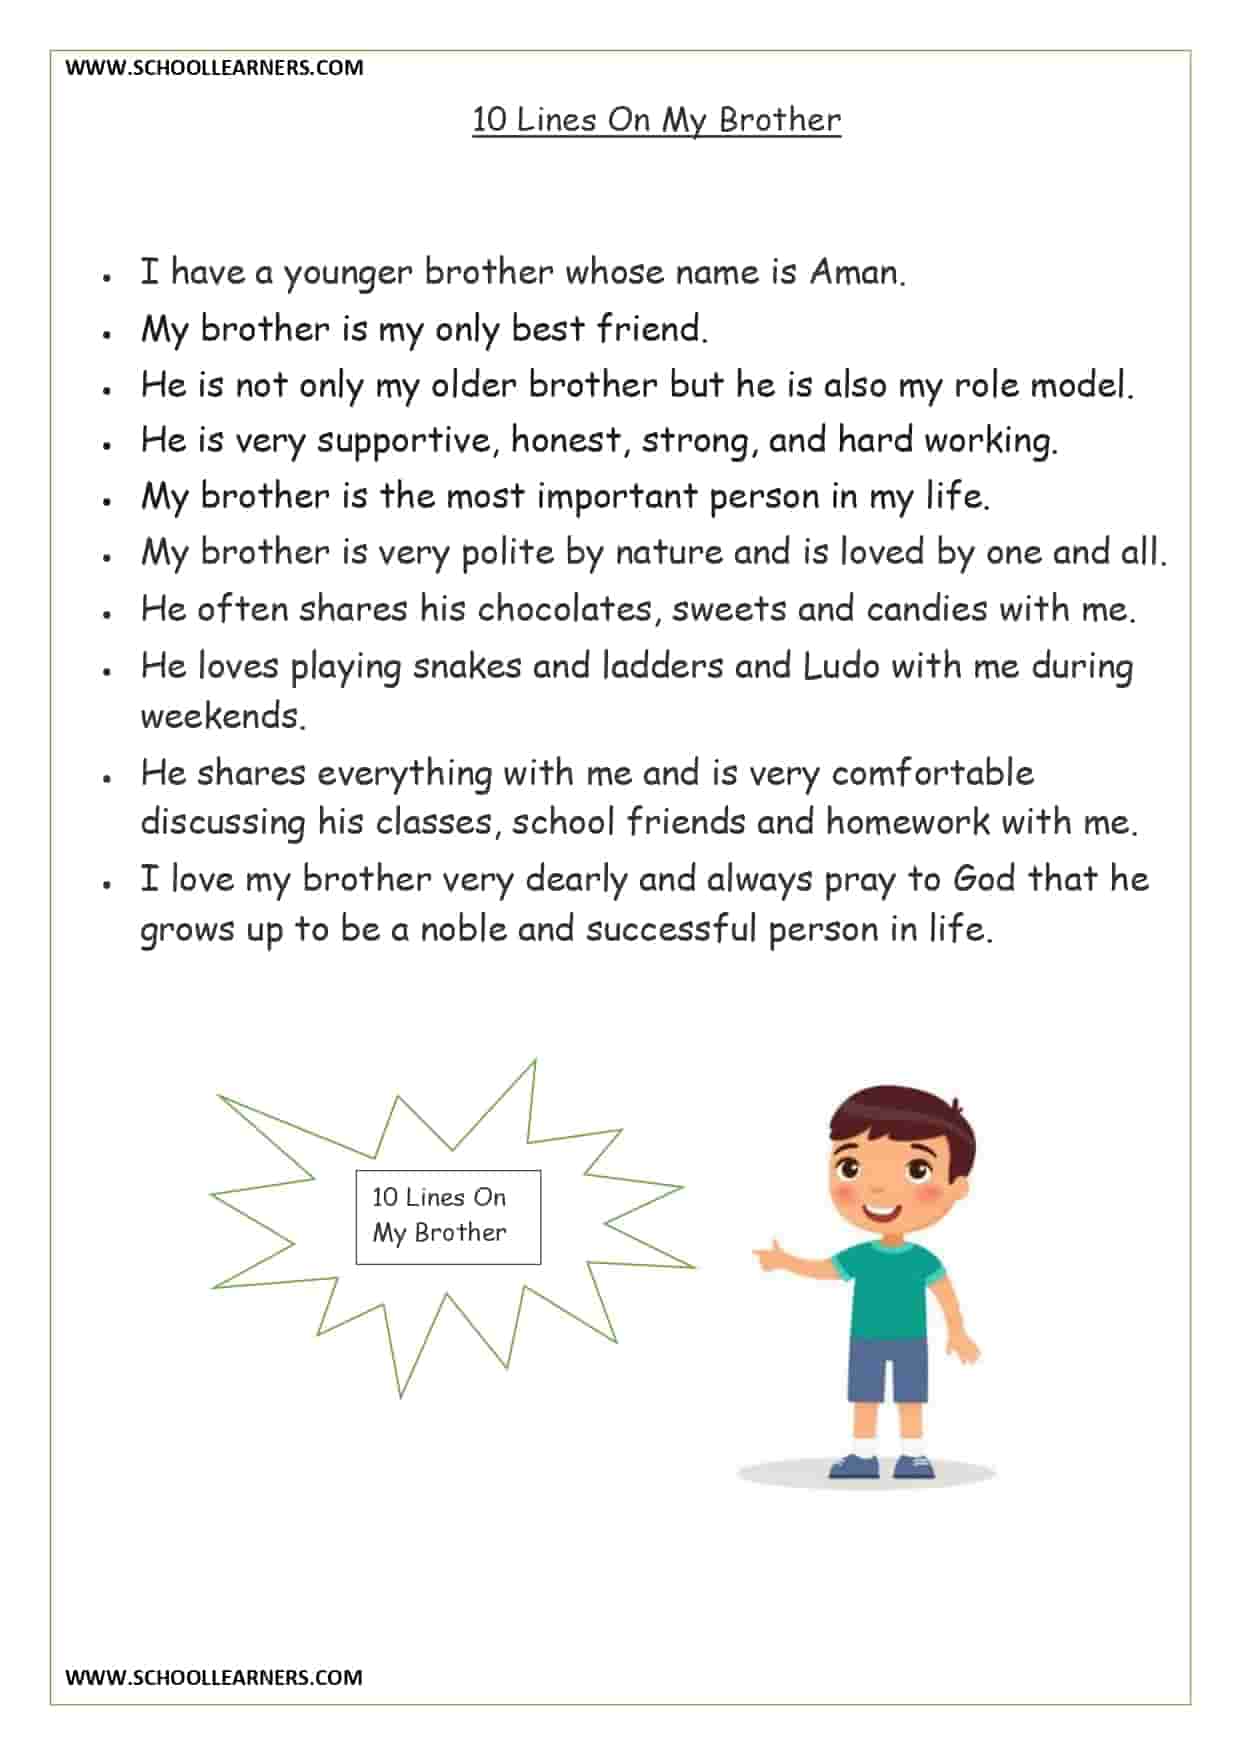 essay on my brother for class 6